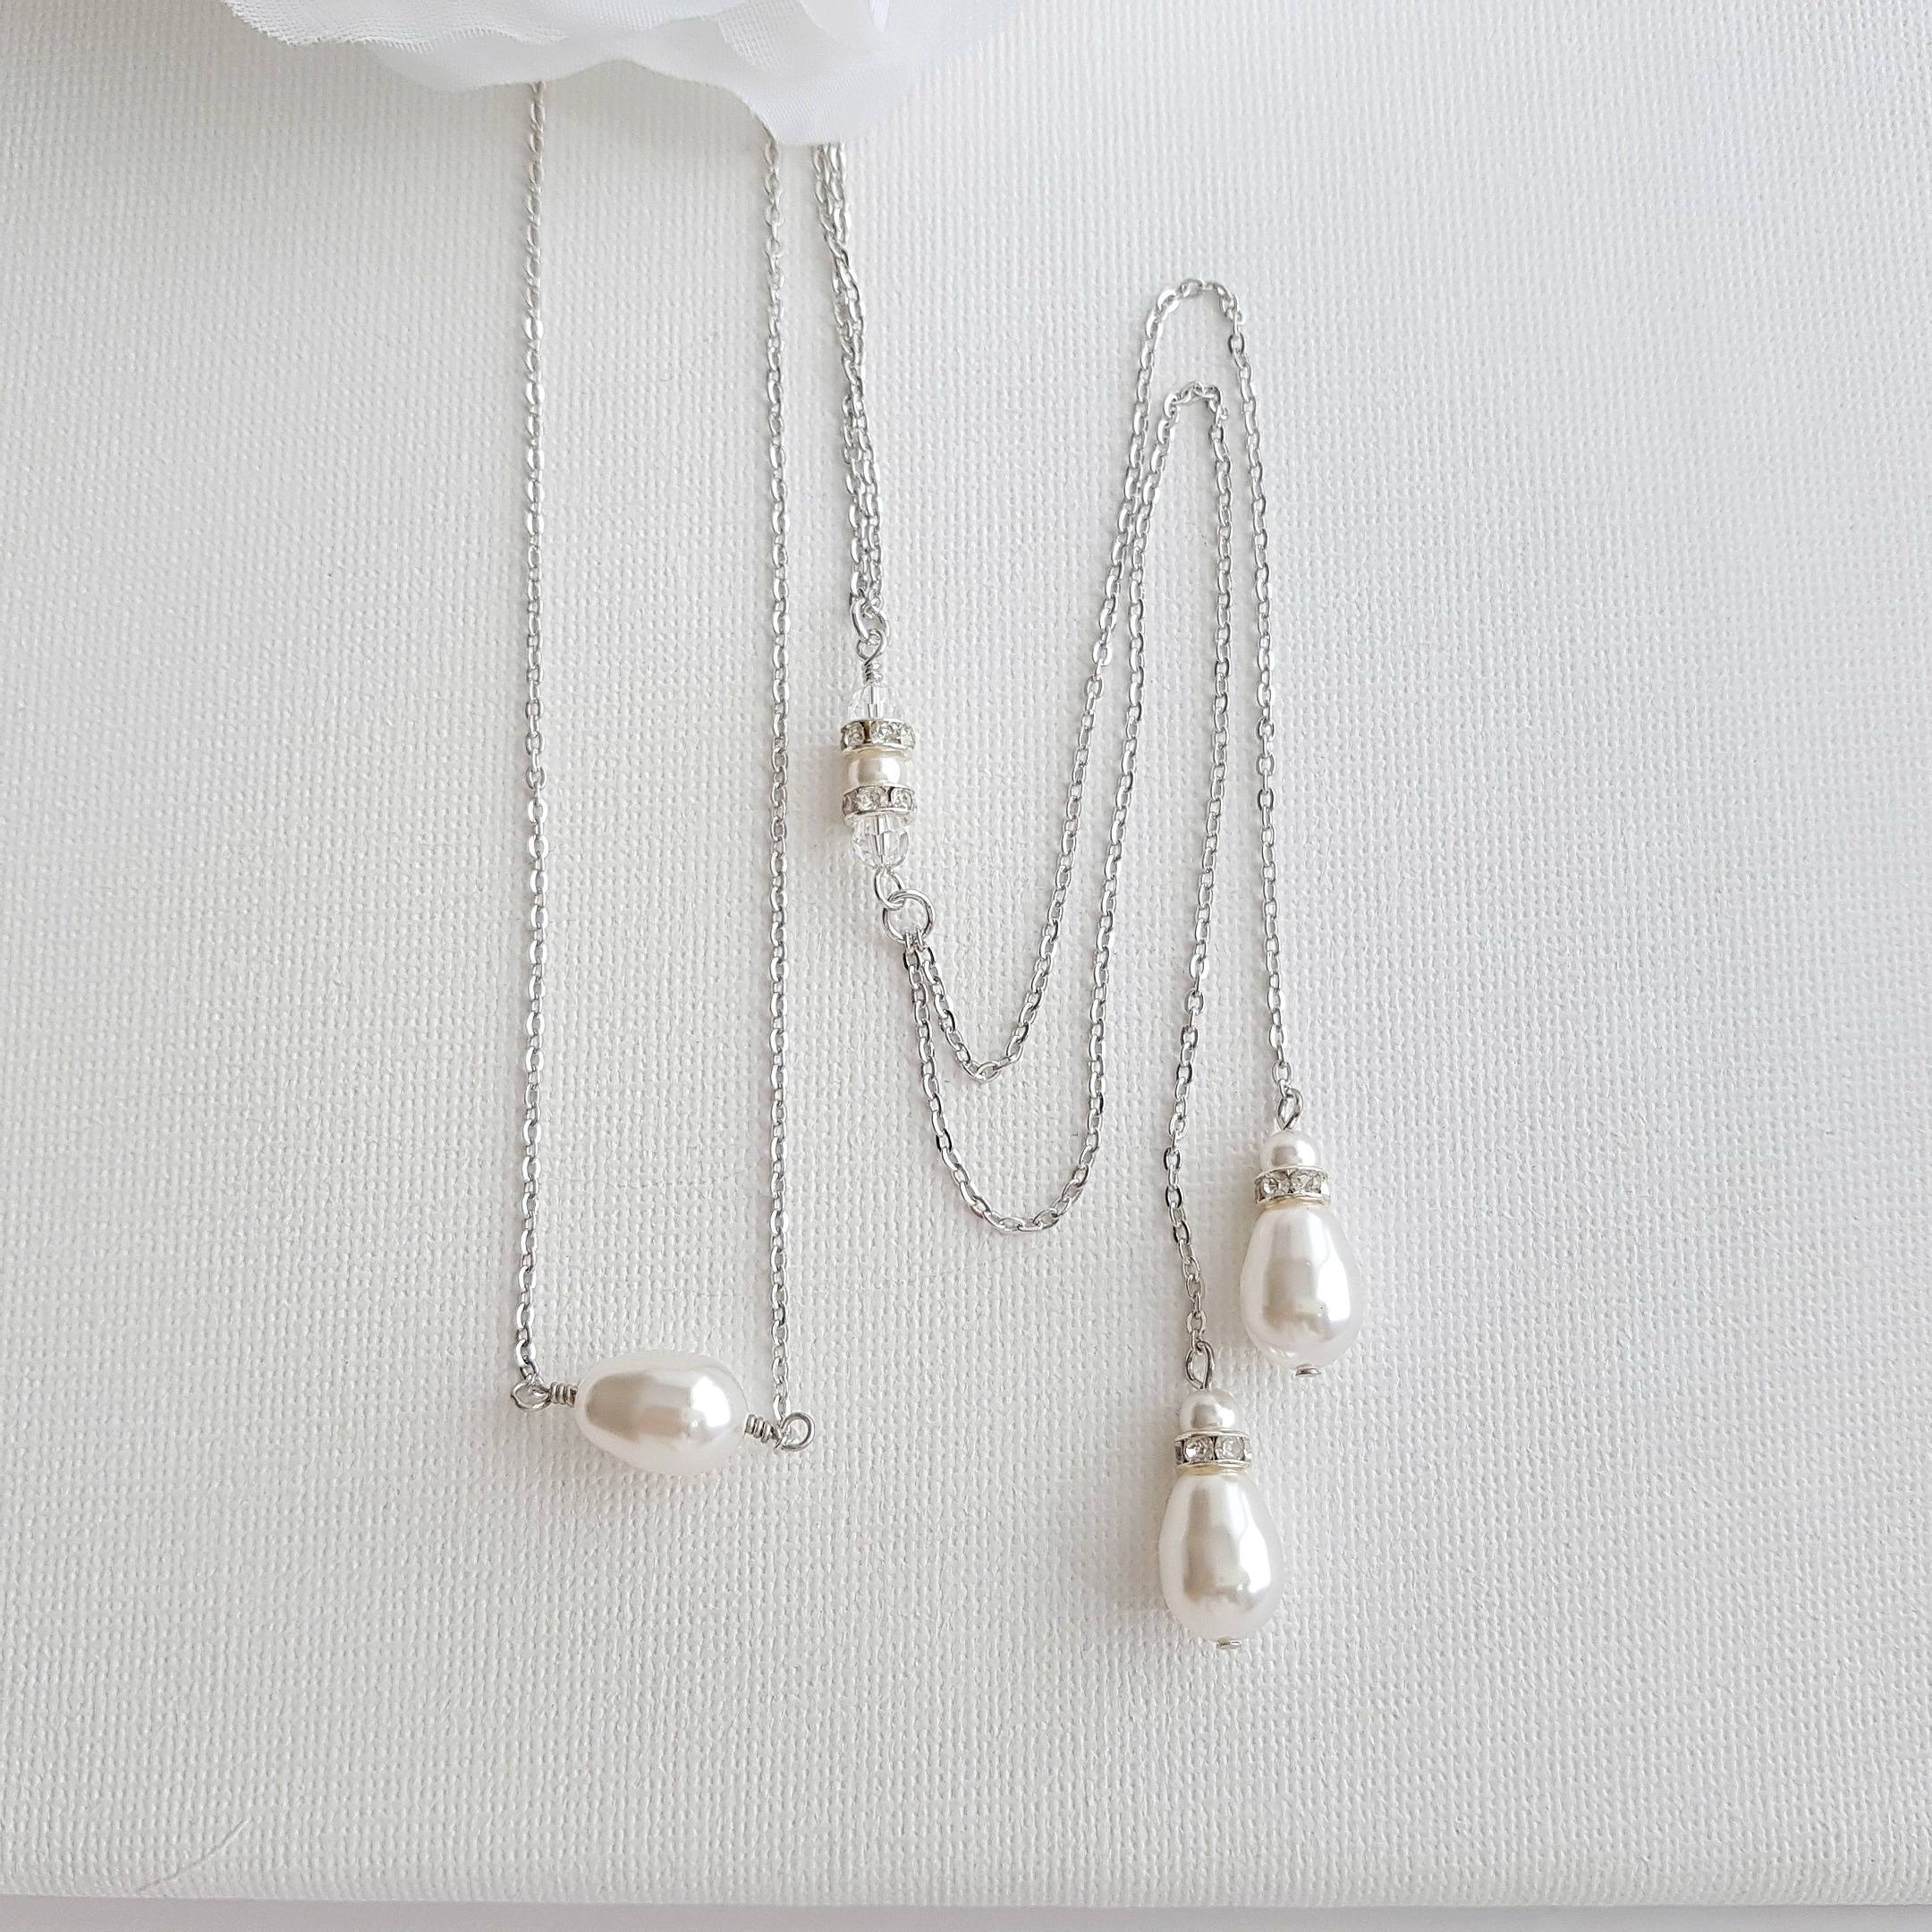 Gold Back Necklace With Chain & Pearl Drops-June